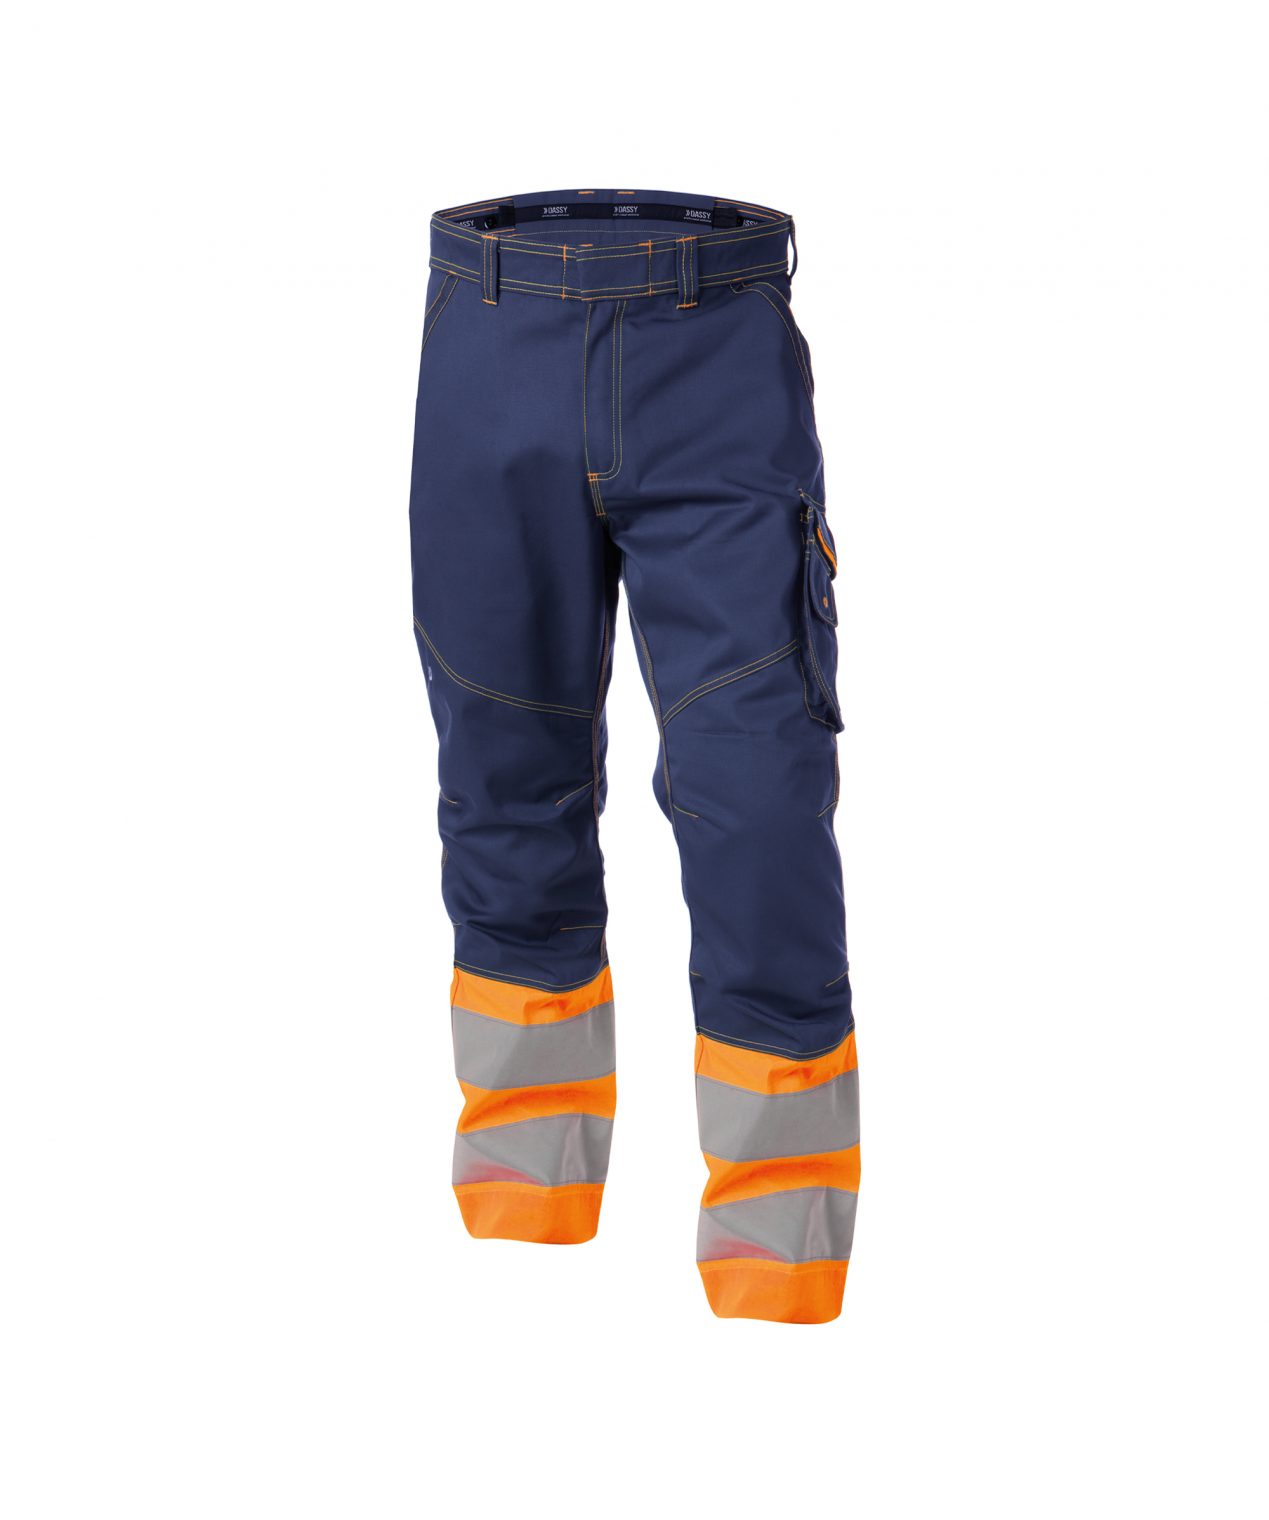 phoenix high visibility work trousers navy fluo orange front